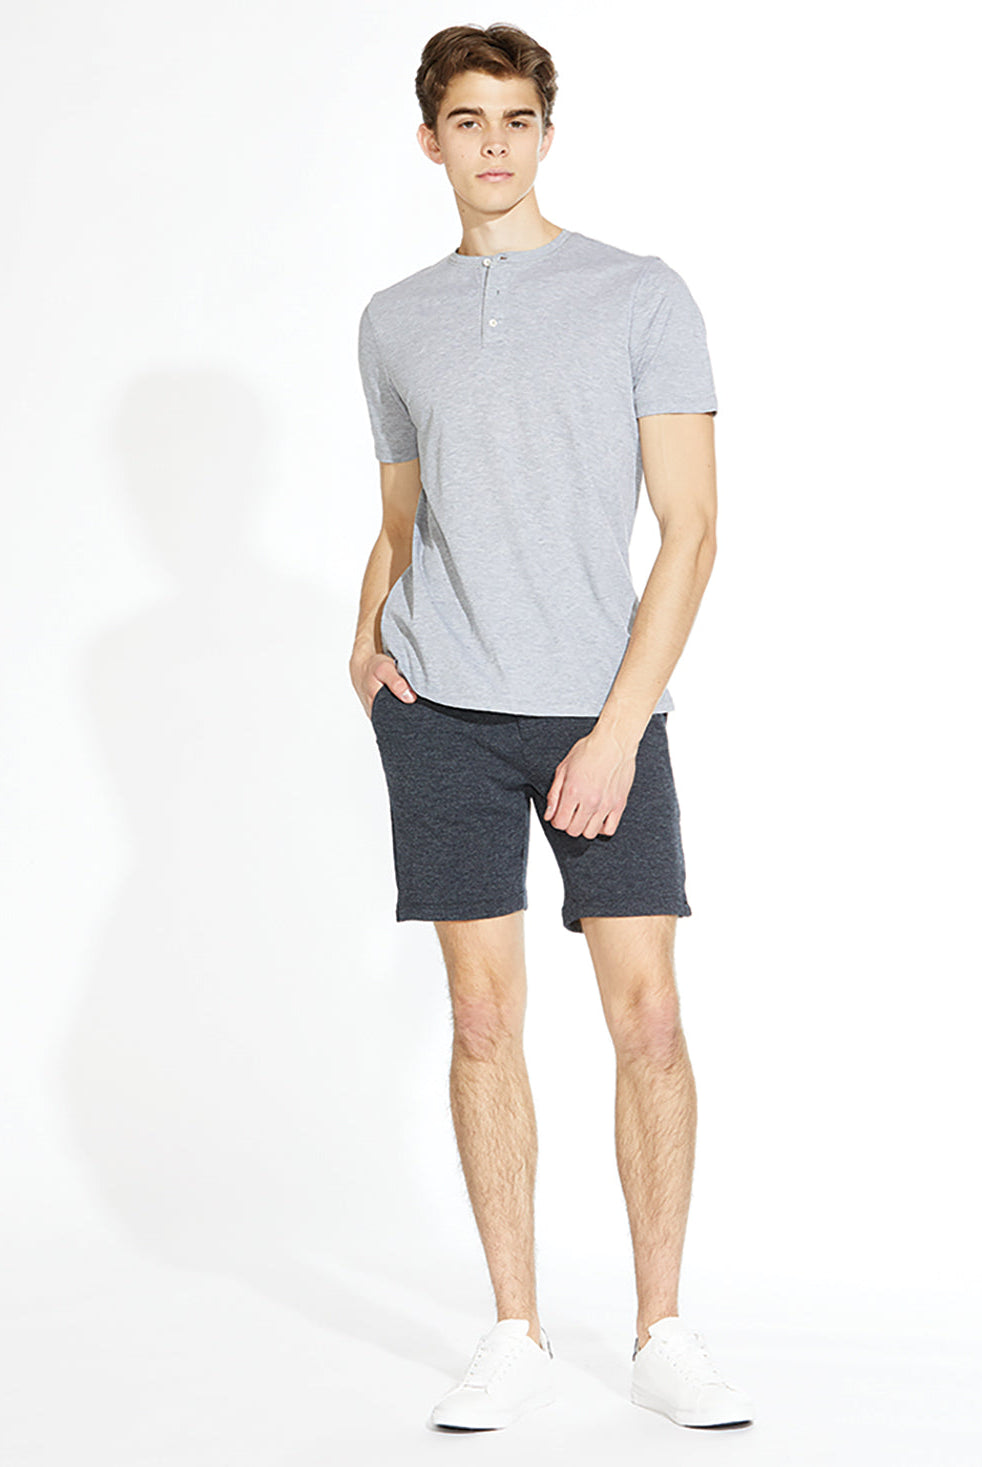 Templeton-Men's Shorts-Vixen Collection, Day Spa and Women's Boutique Located in Seattle, Washington